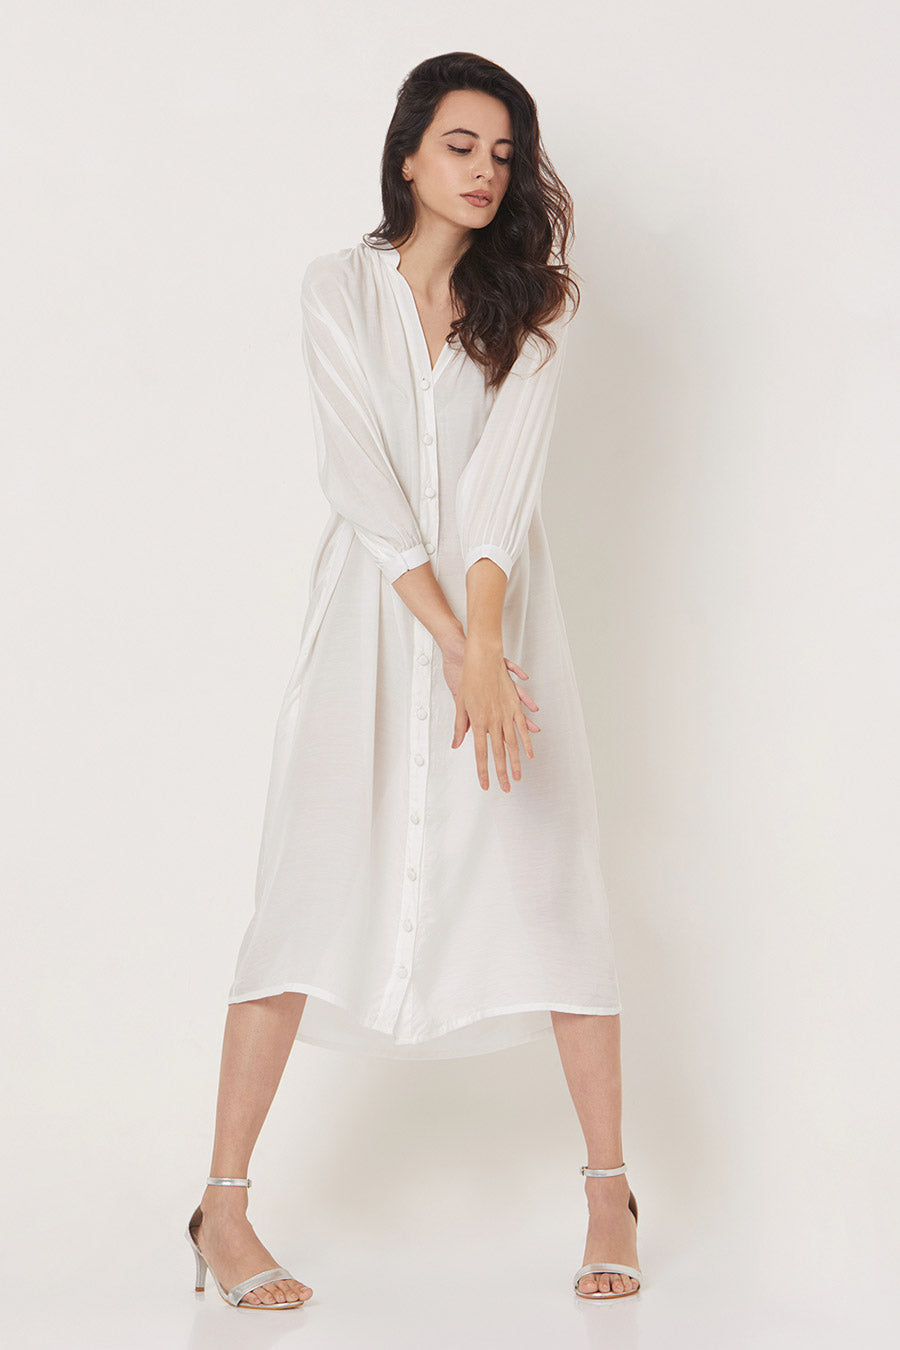 Olive - Off-White Loose Fit Shirt Dress